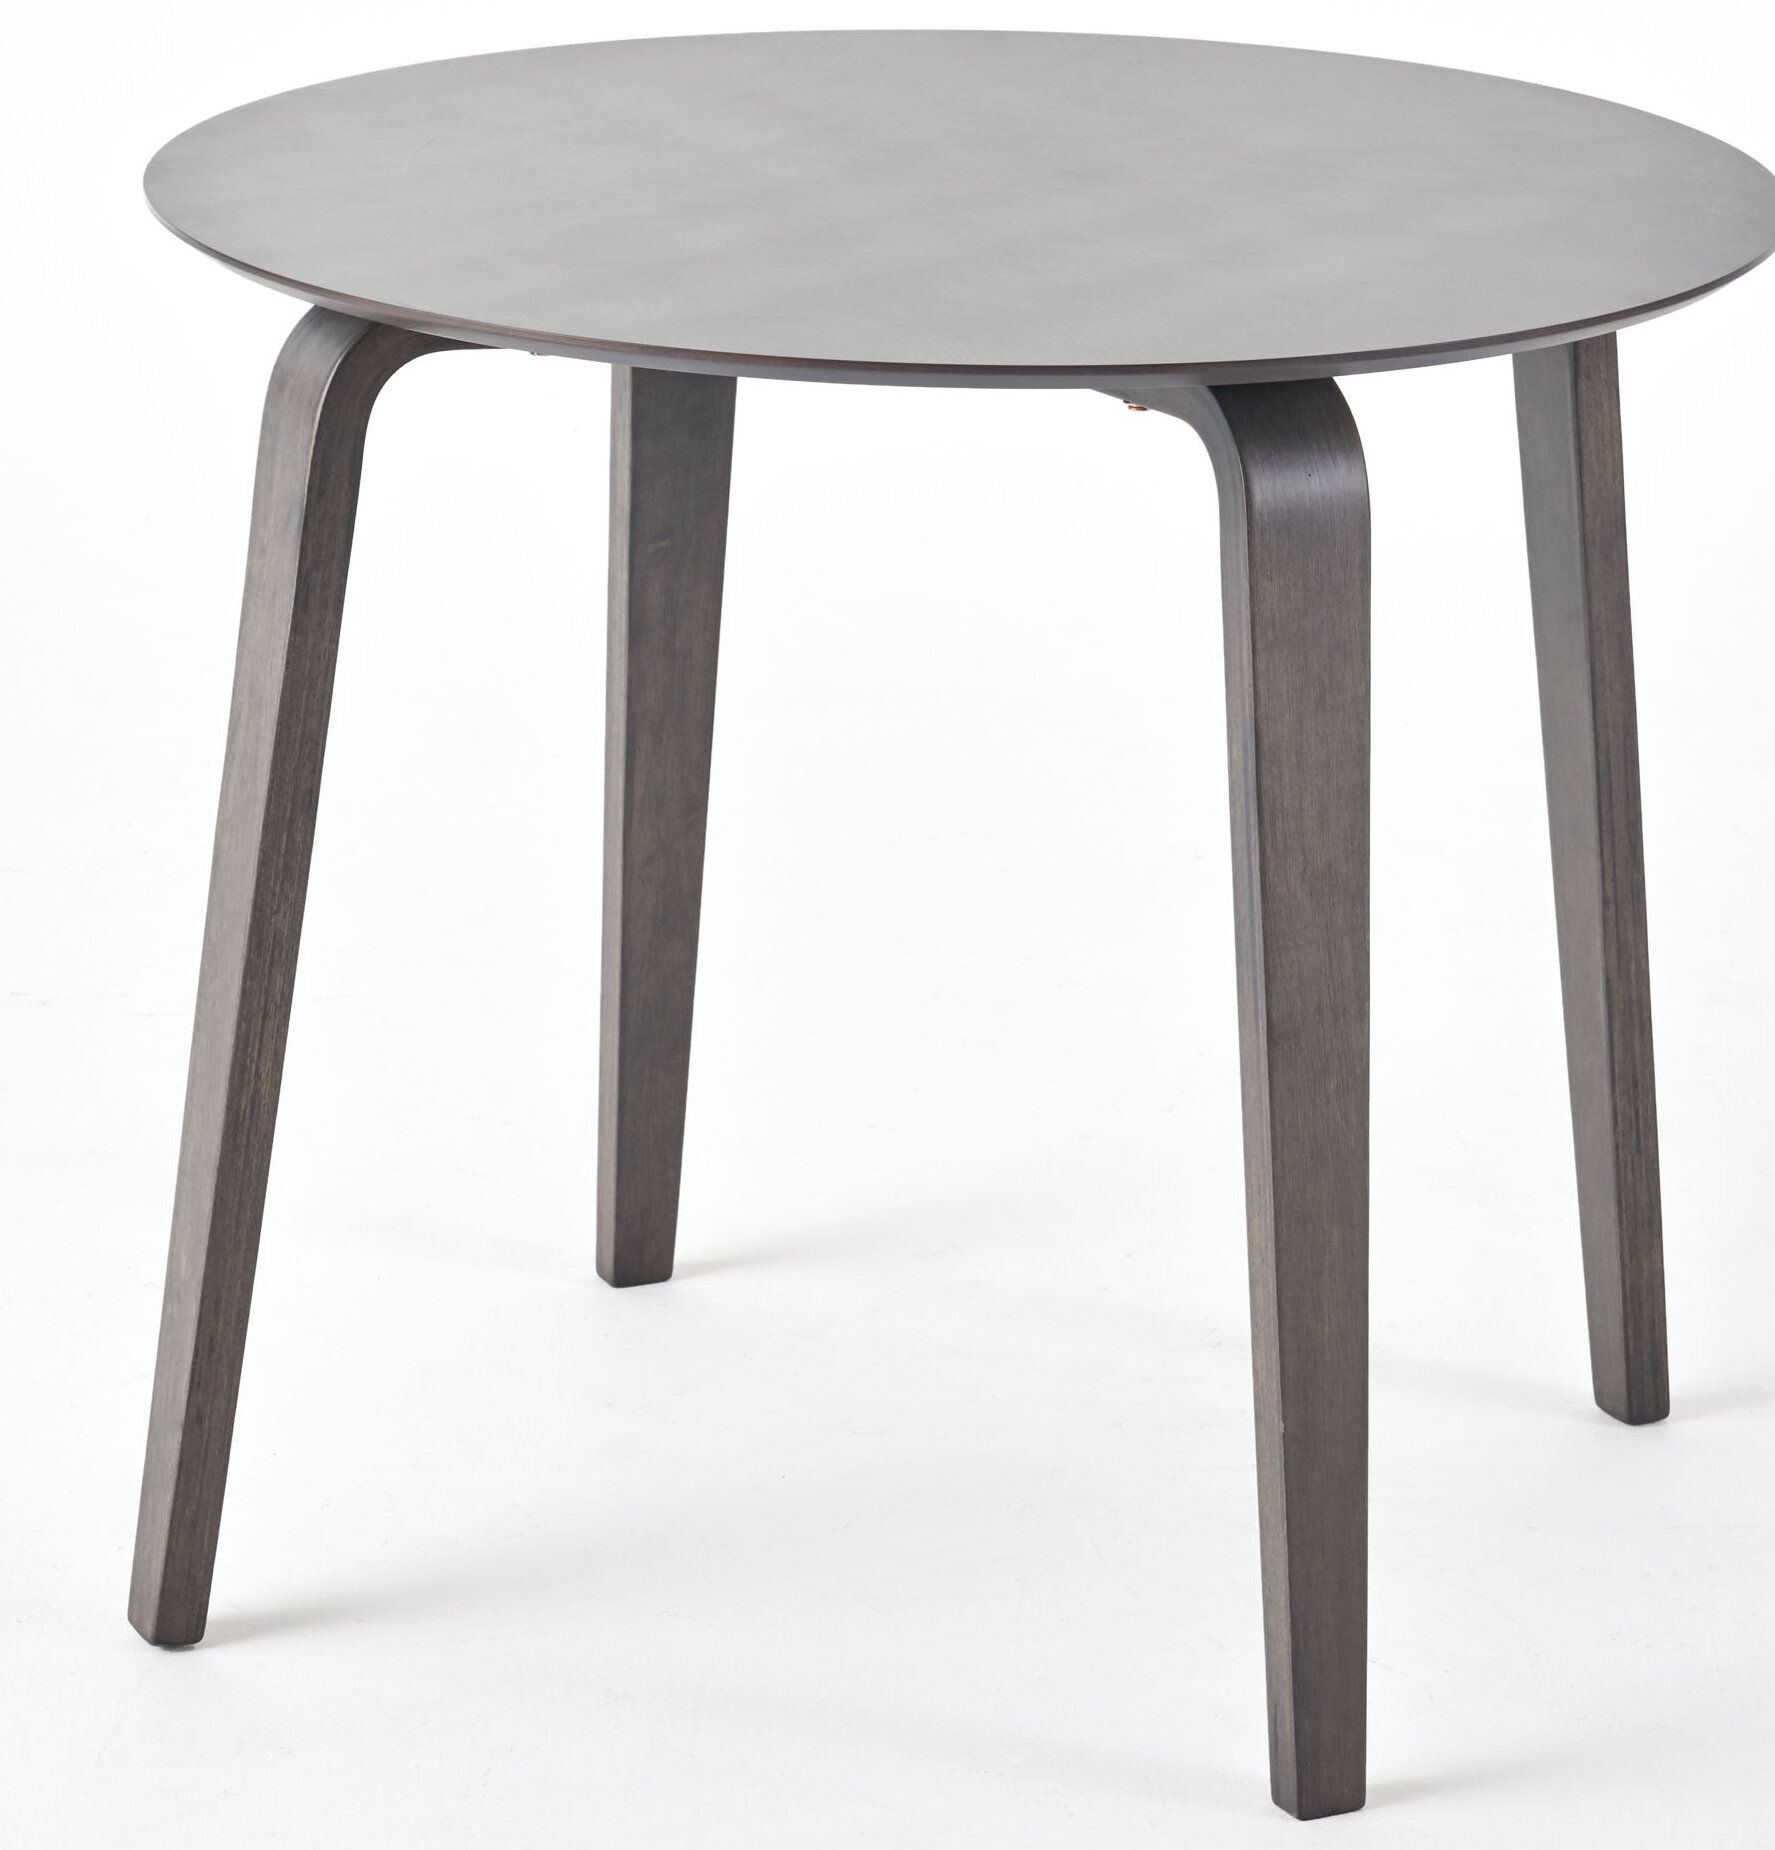 Haneul Dining Table Pertaining To Current Langton Reclaimed Wood Dining Tables (View 23 of 25)